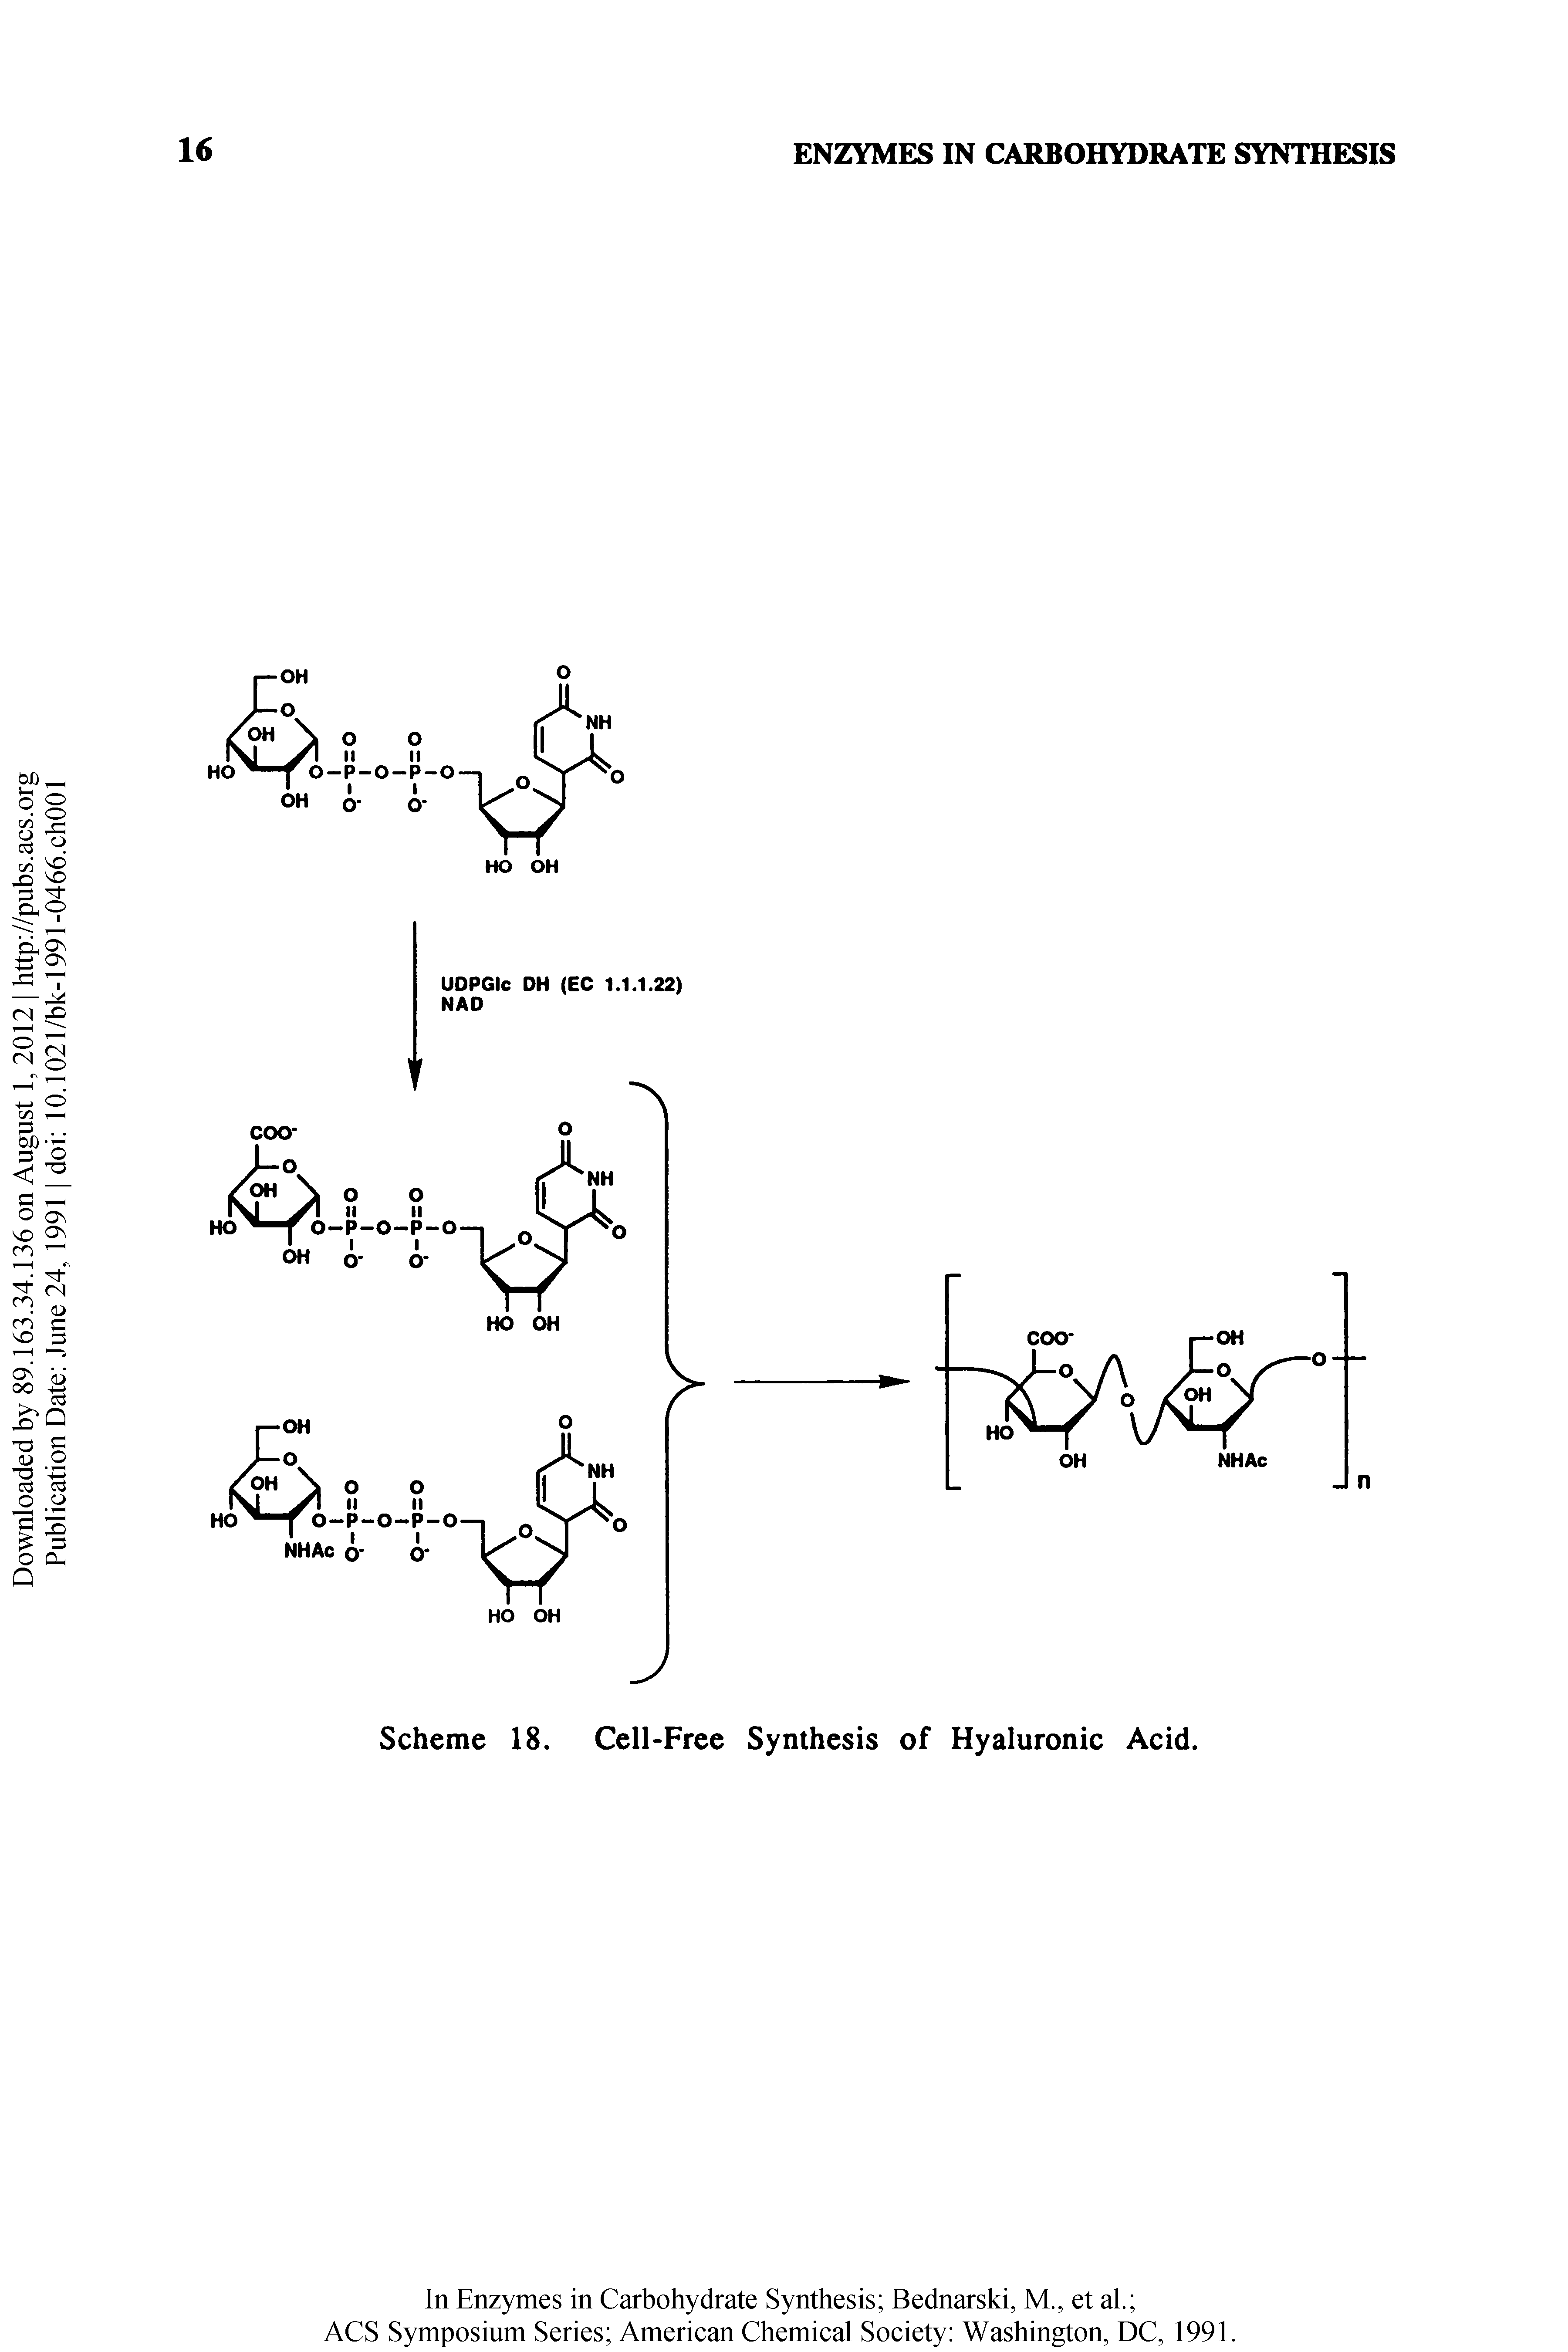 Scheme 18. Cell-Free Synthesis of Hyaluronic Acid.